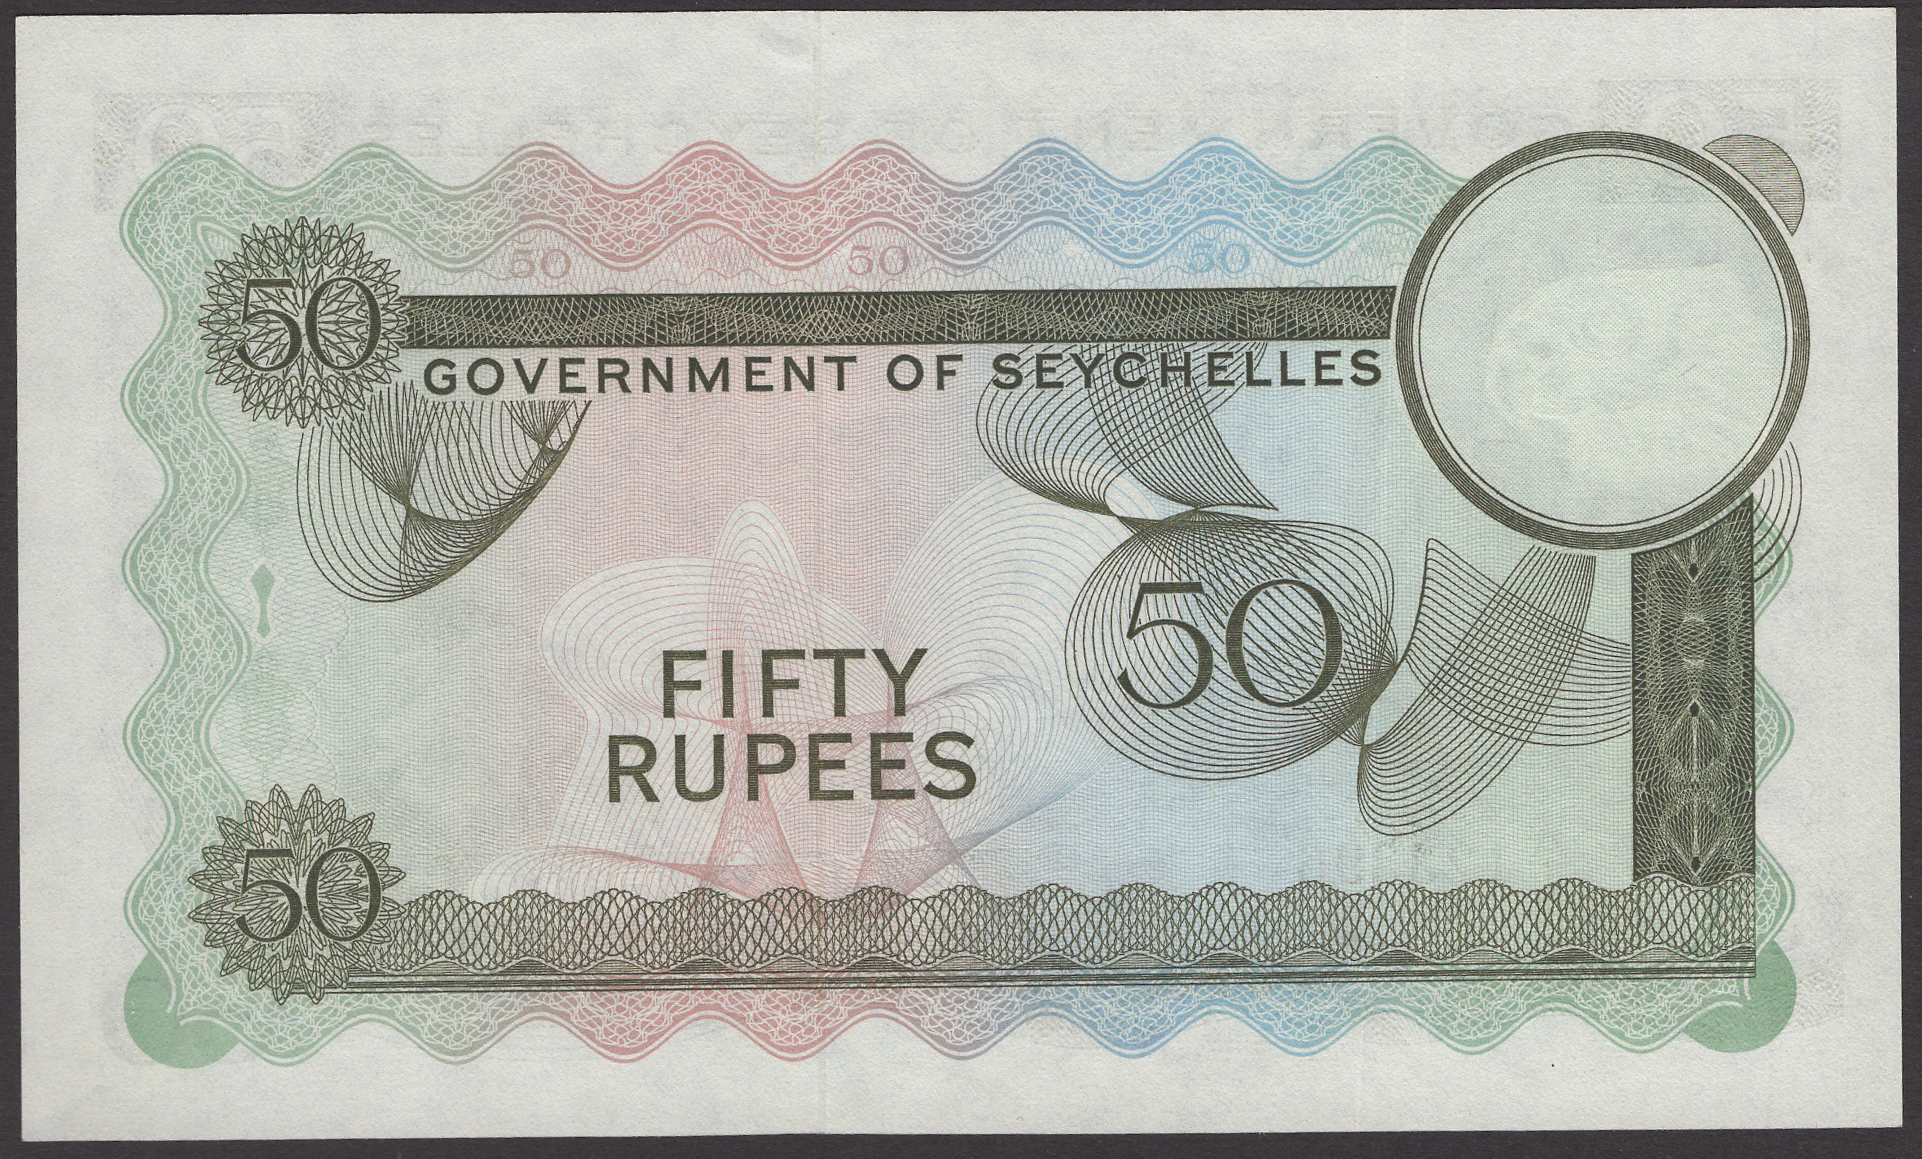 Government of Seychelles, 50 Rupees, 1 January 1972, serial number A/1 123396, Greatbach... - Image 2 of 2